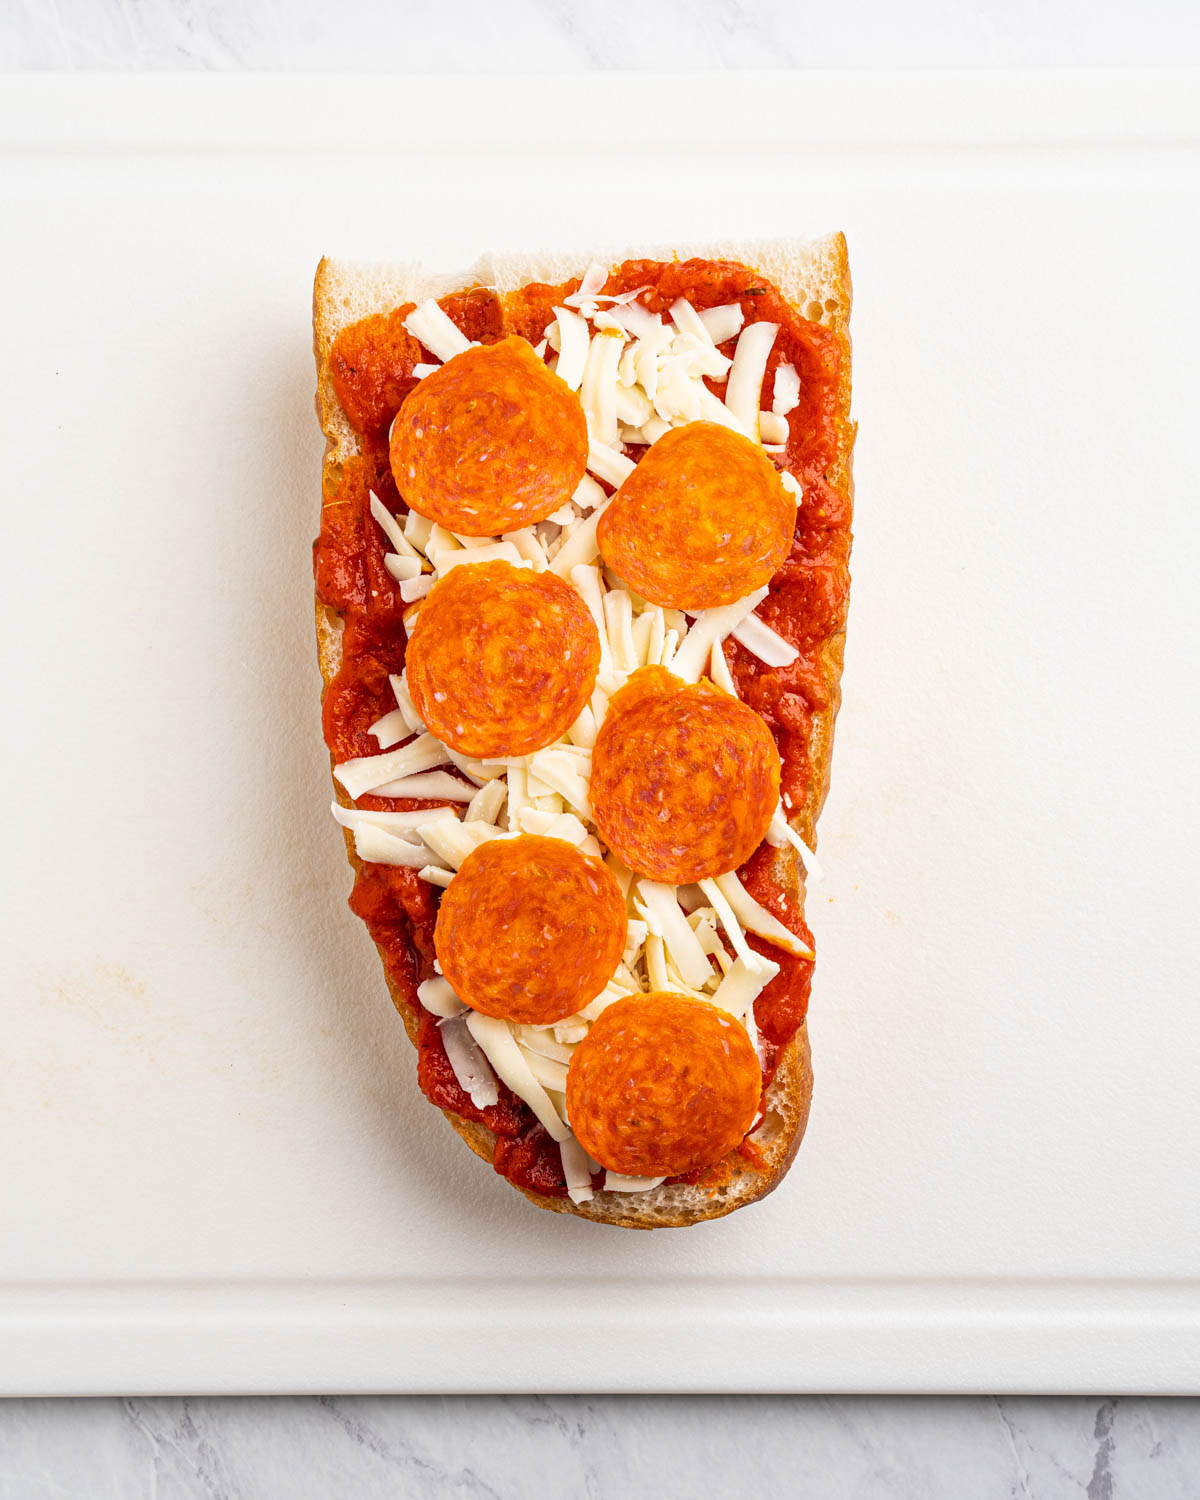 A slice of french bread is topped with pizza sauce, shredded mozzarella cheese and sliced pepperoni. 